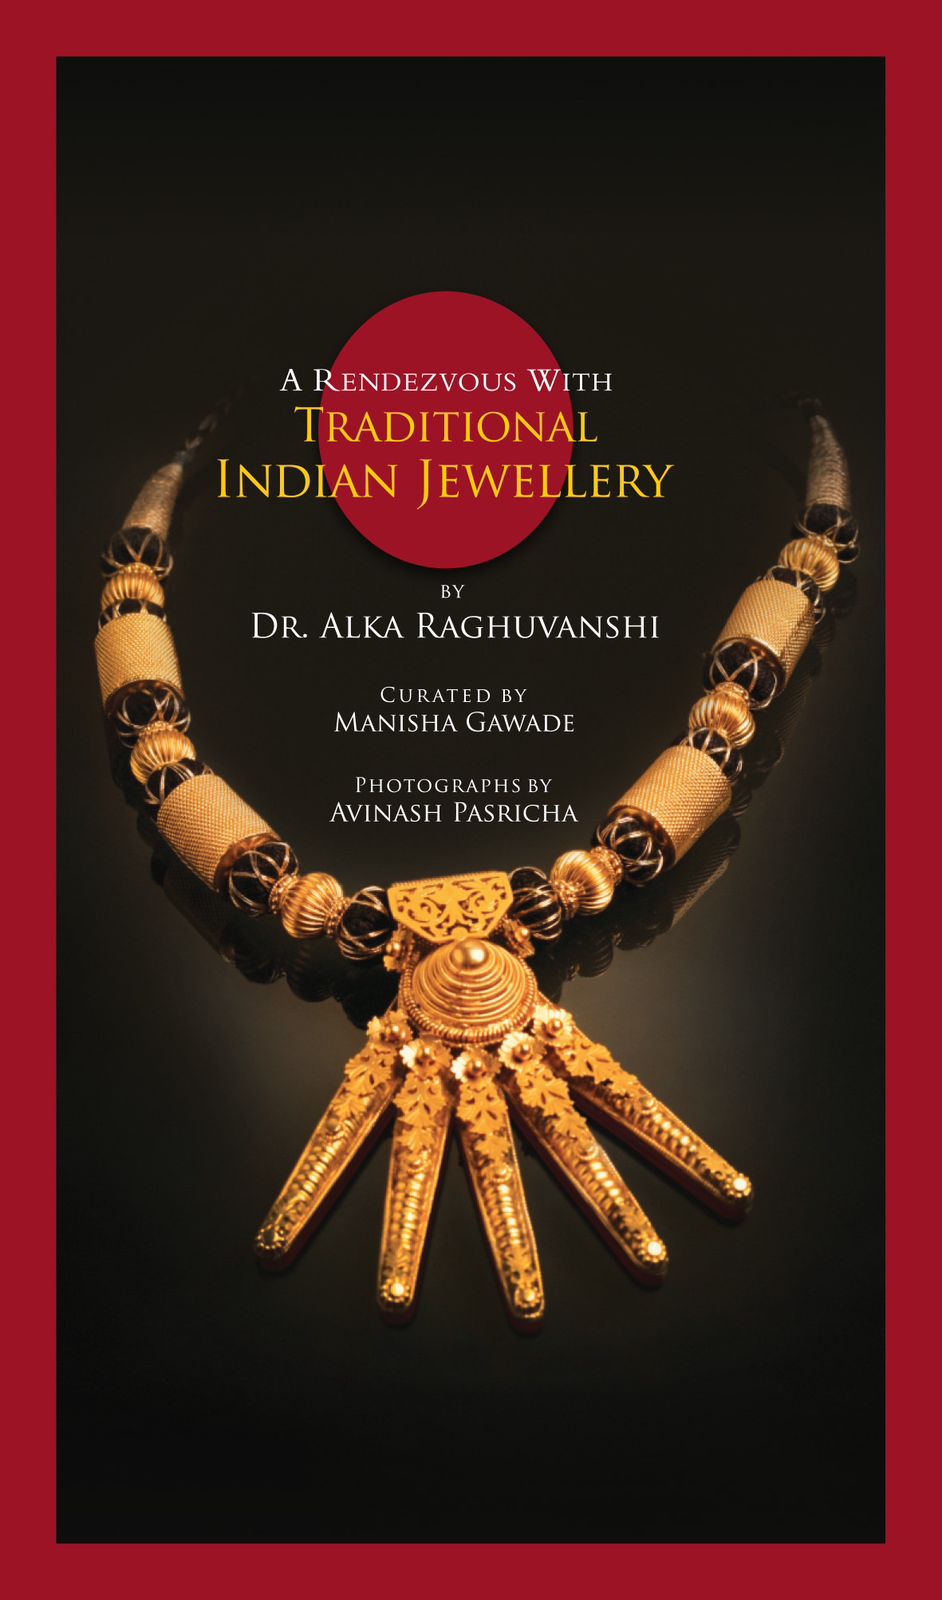 A Rendezvous with traditional Indian jewellery